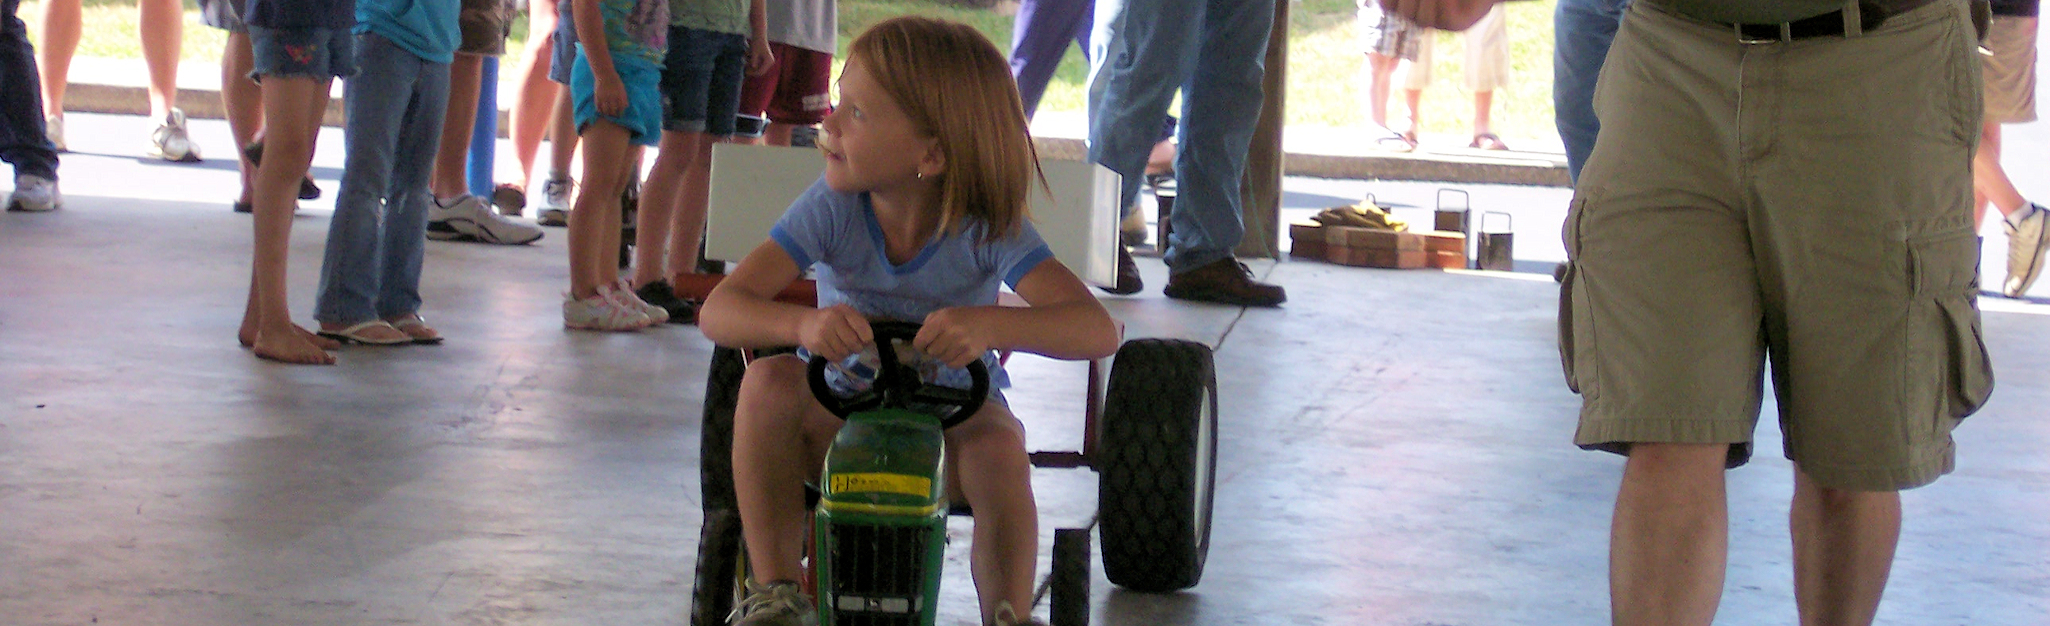 Photo of a young girl on a small toy tractor